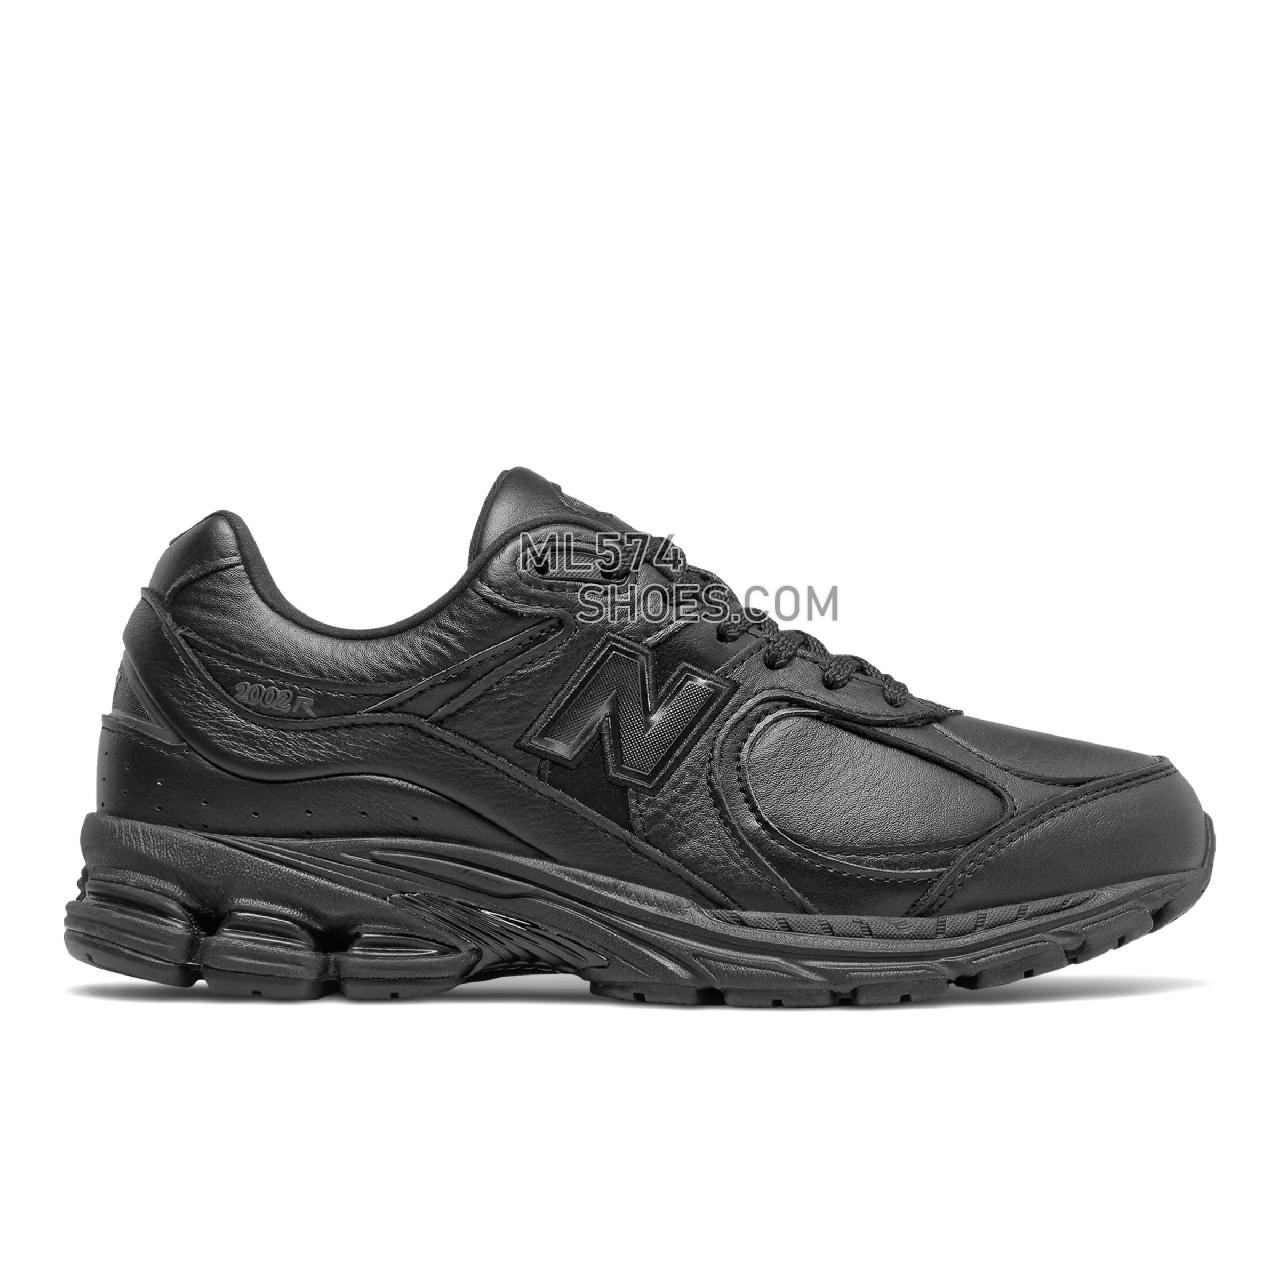 New Balance 2002R - Men's Sport Style Sneakers - Black with Silver Metallic - ML2002RK